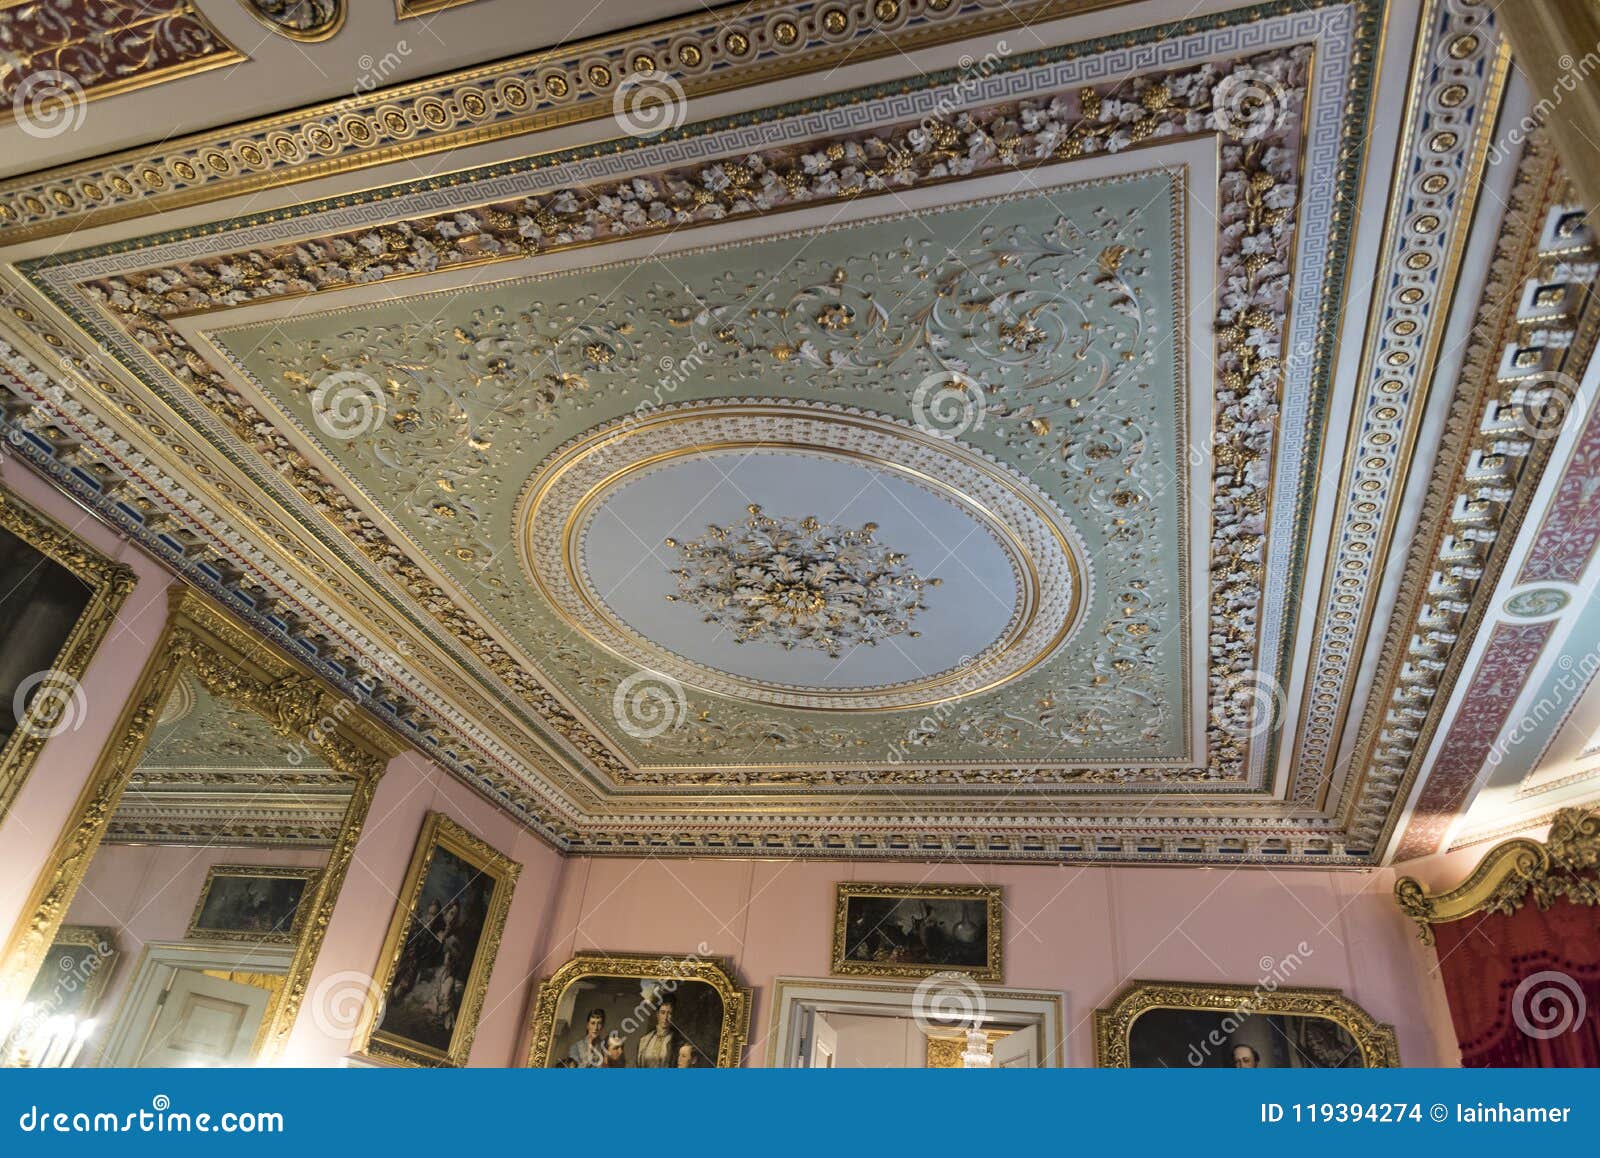 Ceiling of a Reception Room Osborne House Editorial Stock Image - Image ...